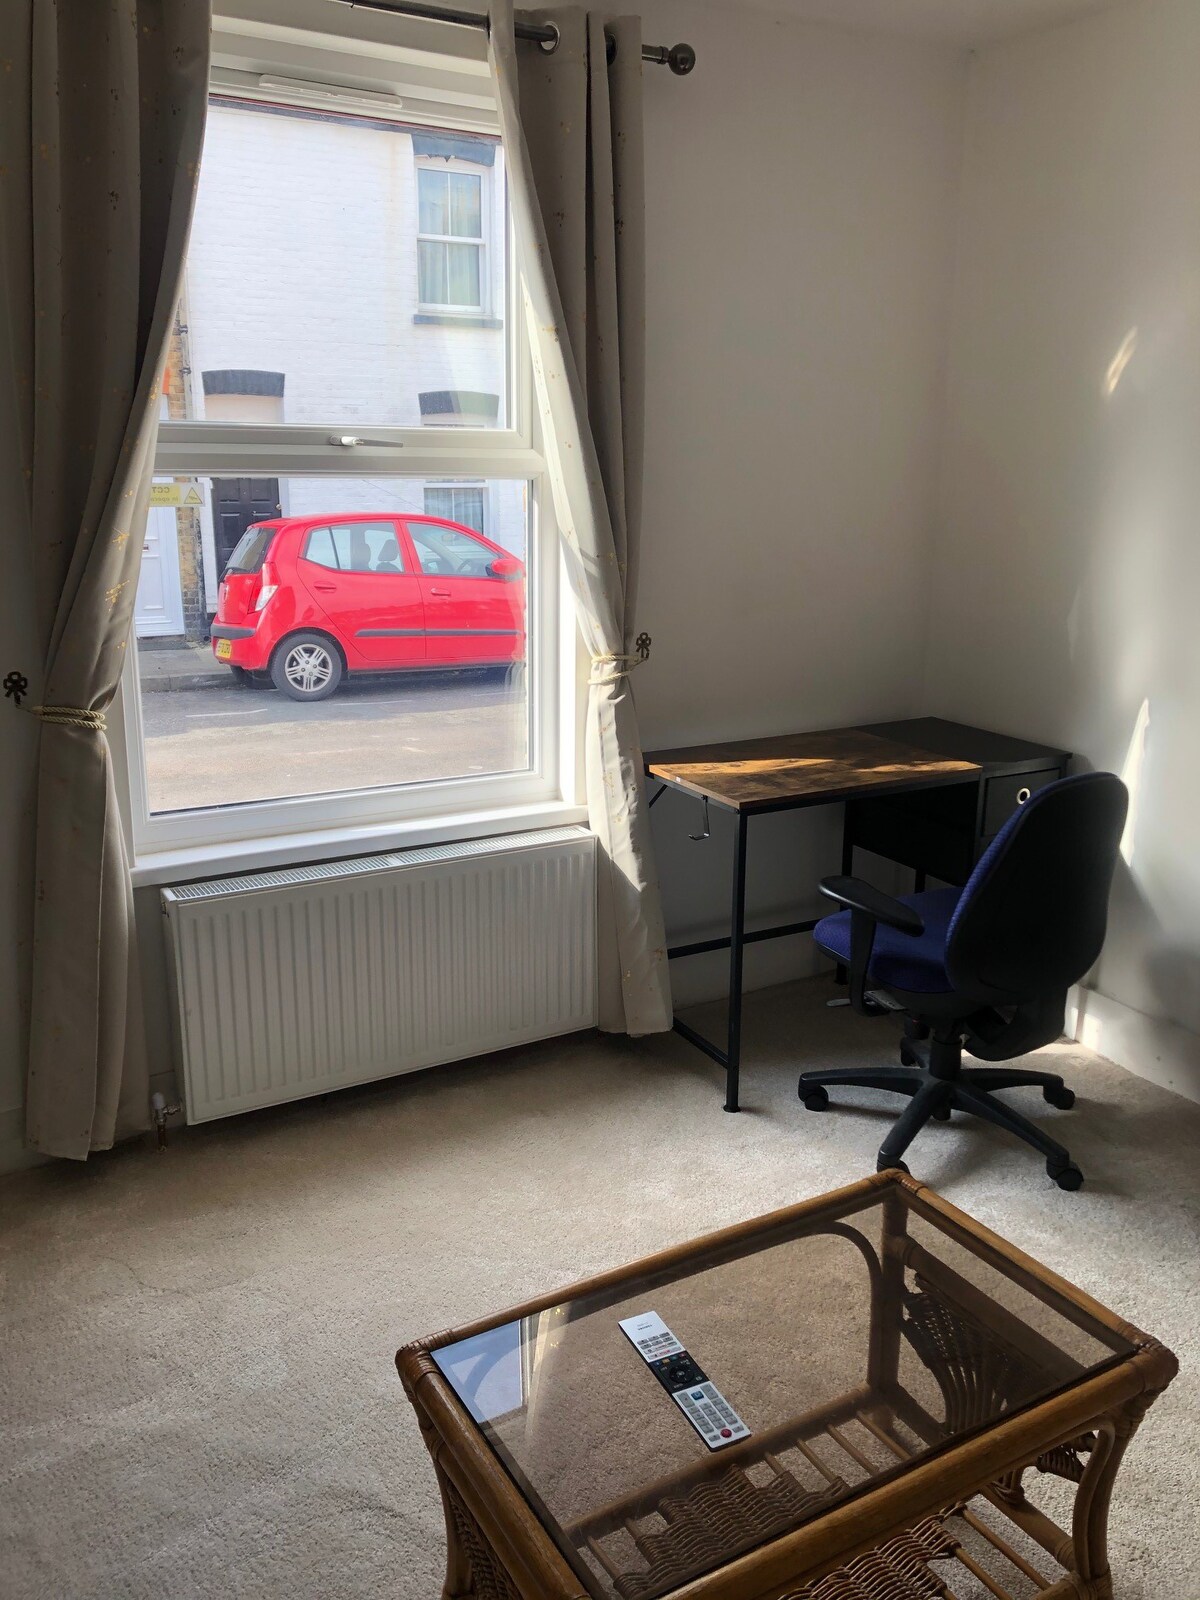 Two Bedroom End of Terrace House near High Street